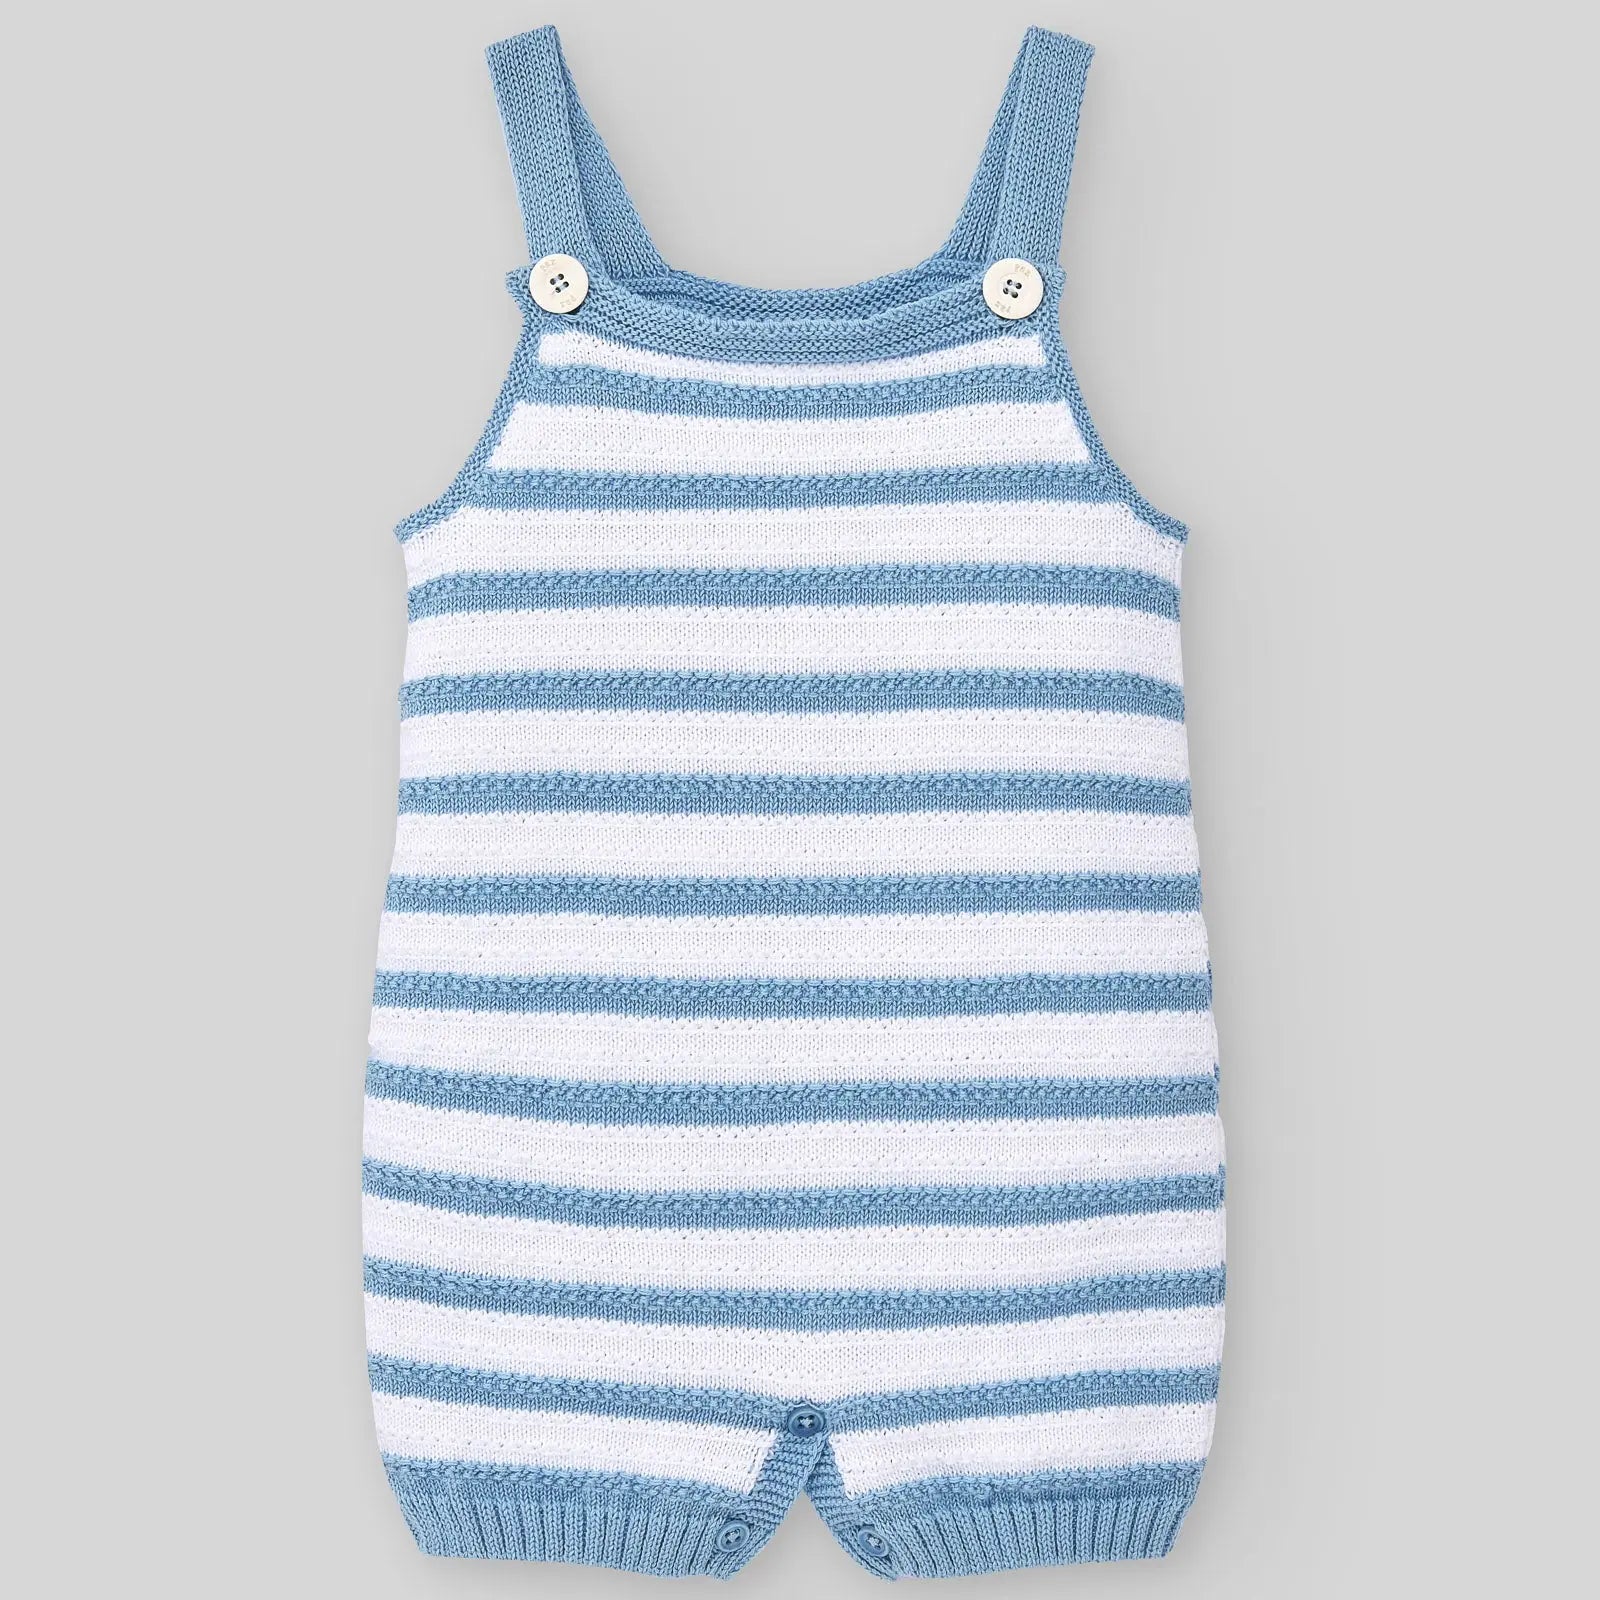 Blue Almonds Ltd Boy's Knitted Overall Set in Wite & Topaz Blue paz rodriguez